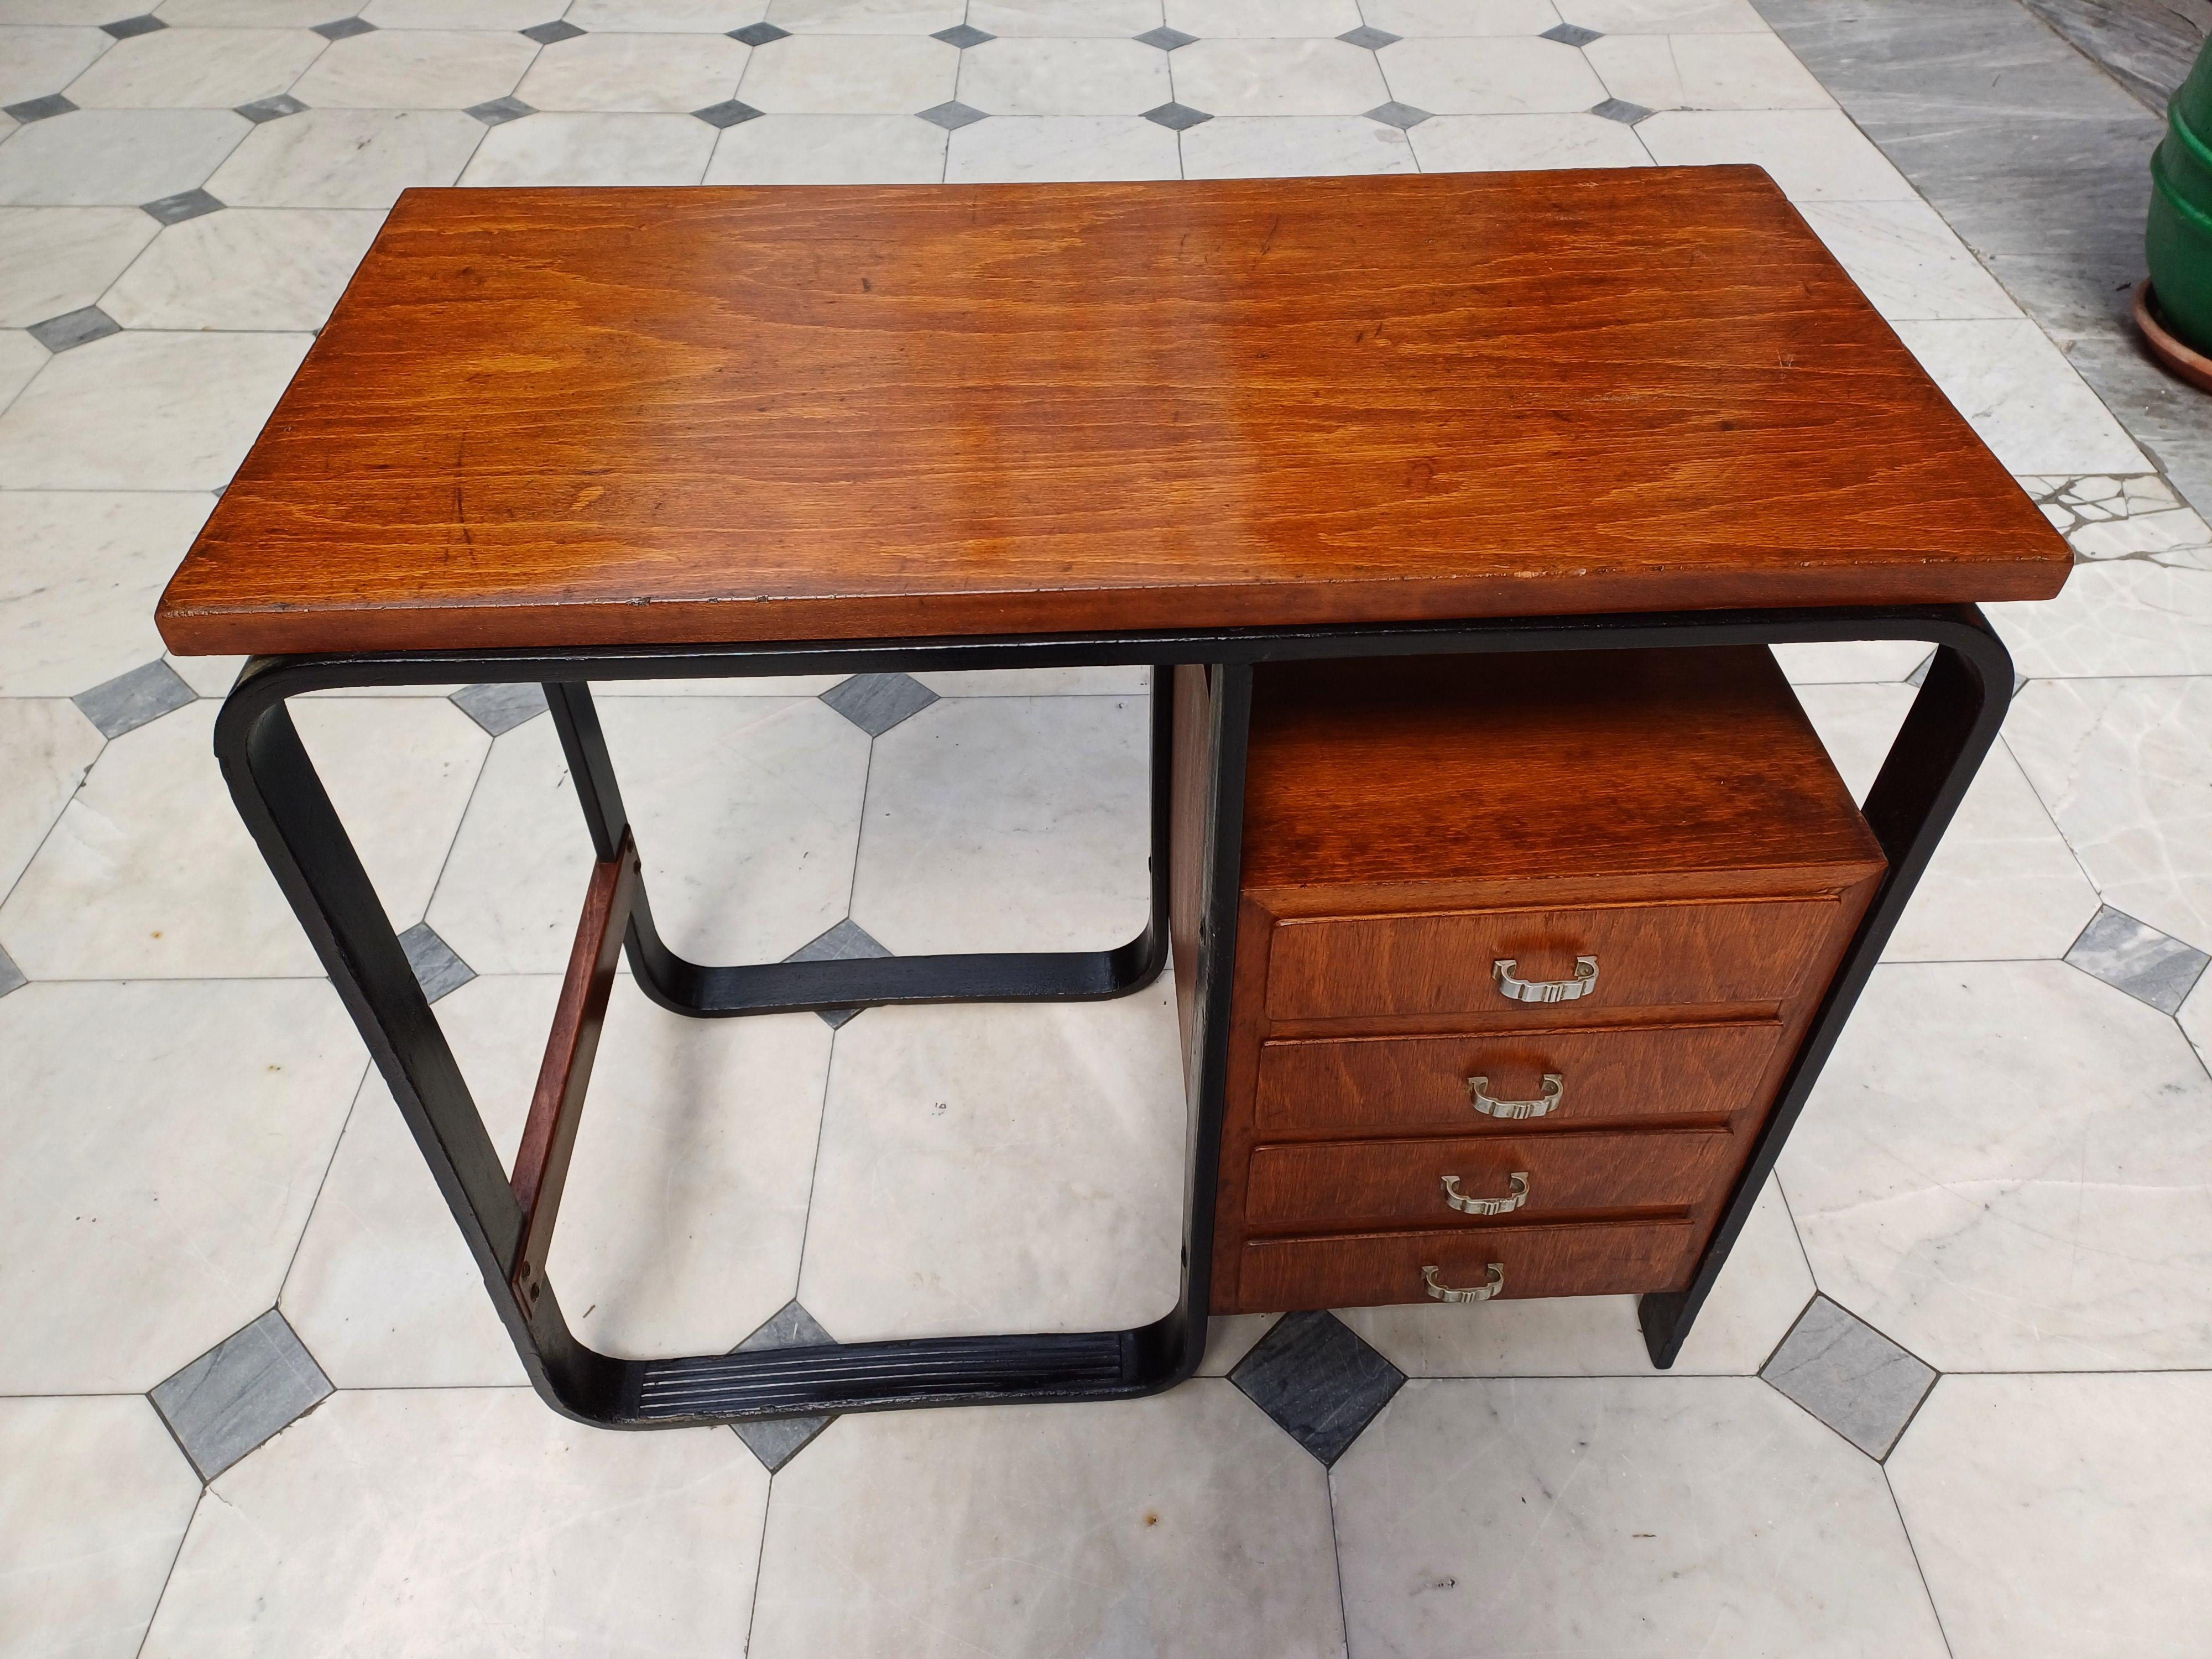 Other Small Writing Desk Giuseppe Pagano Pogatschnig 1940 Italy  For Sale